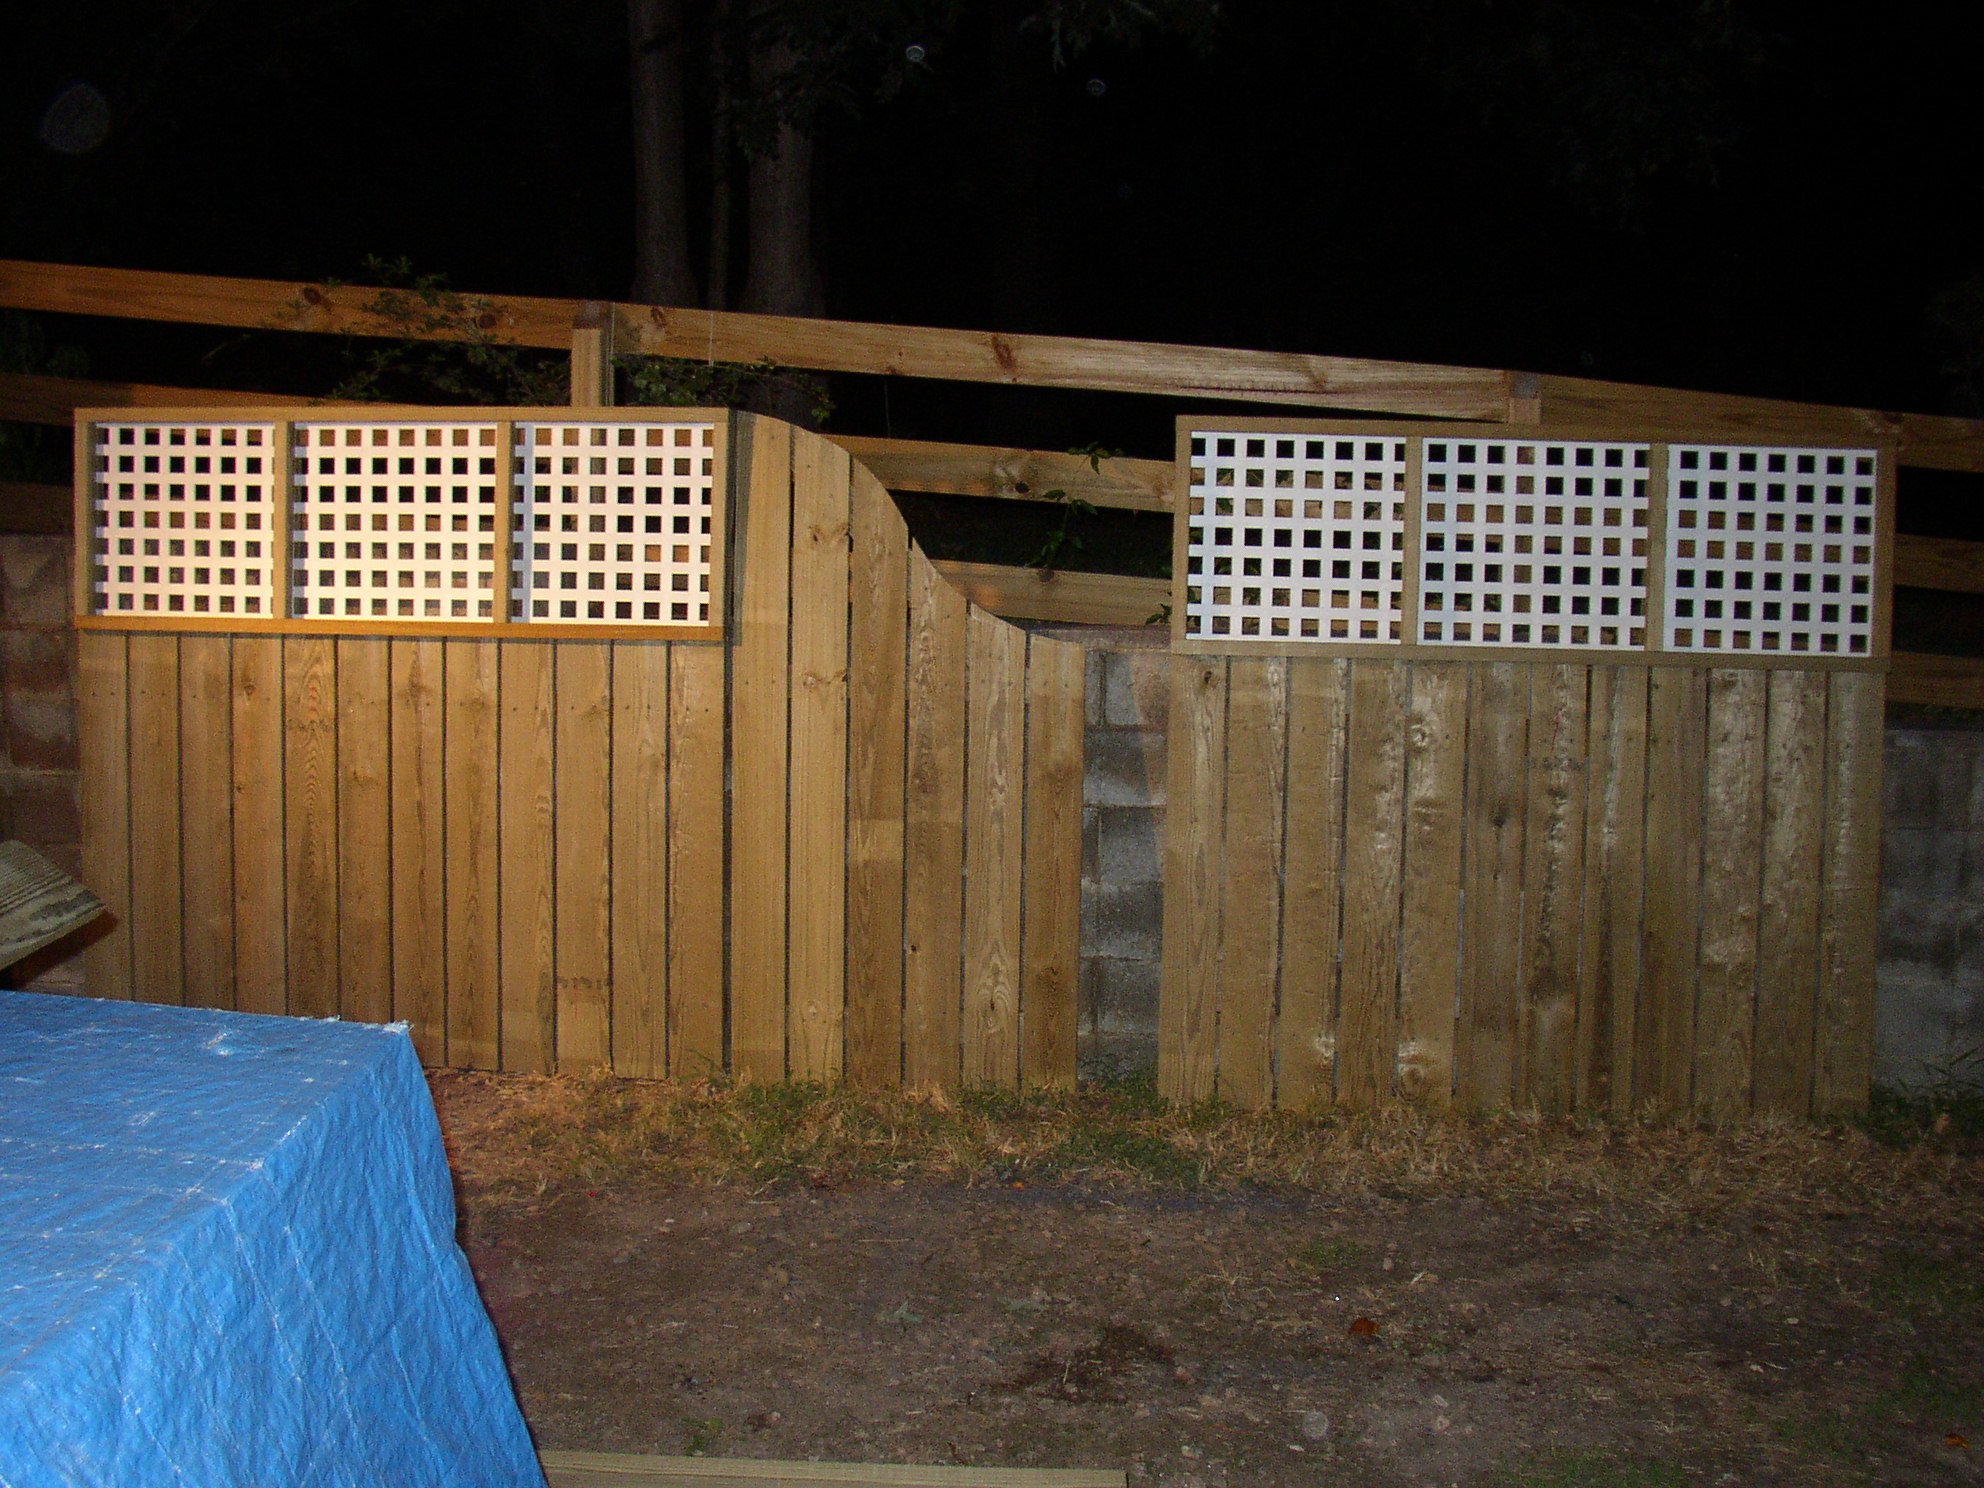 Fence in progress. Got a little curl to that pine grain on the right.